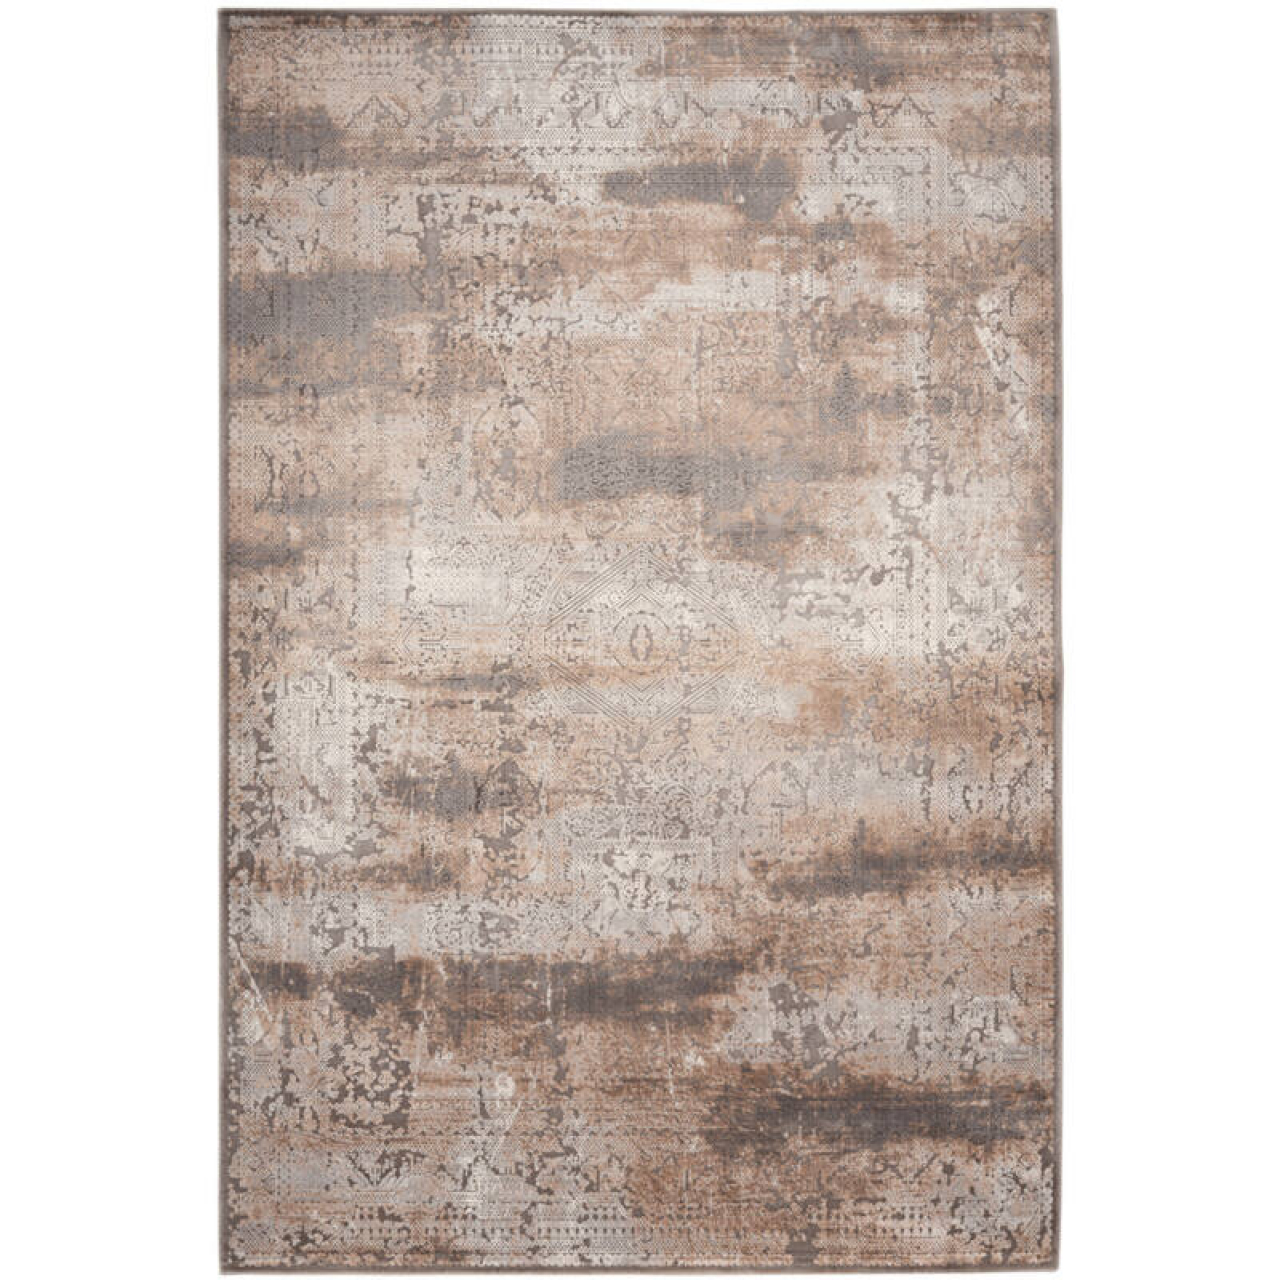 Obsession Haute Couture Jewel 950 Taupe szőnyeg-80x150